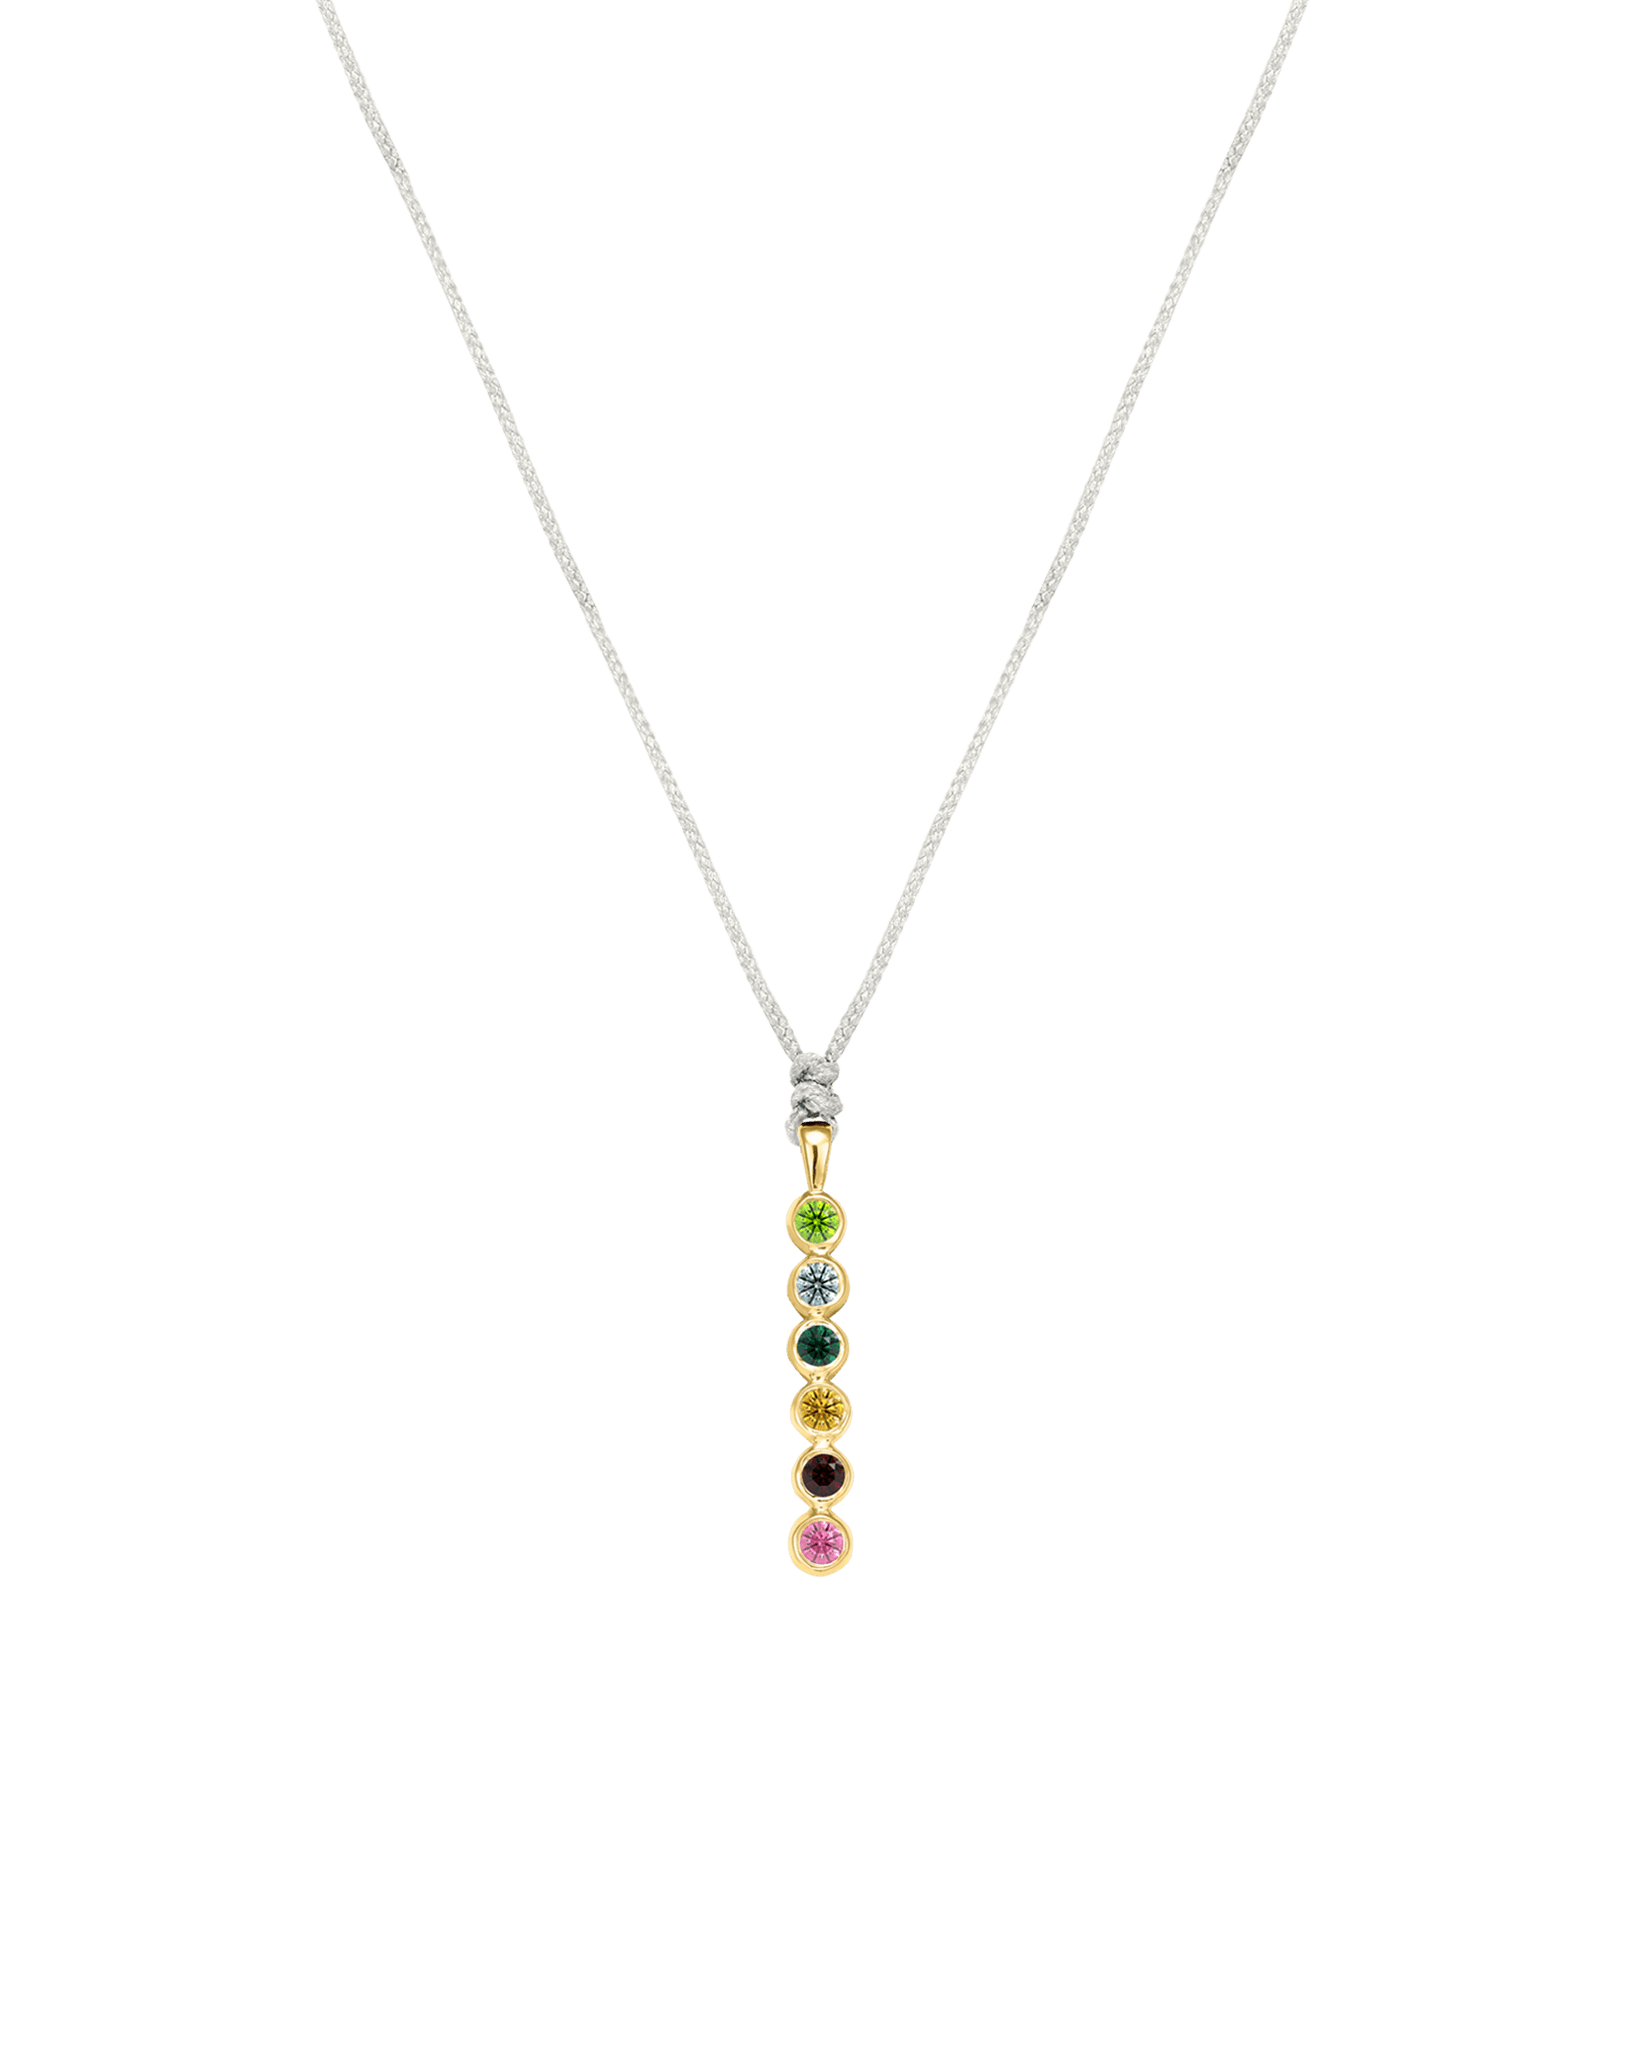 The Birthstones Bar Necklace - 14K Yellow Gold Necklaces 14K Solid Gold Pearl 2 